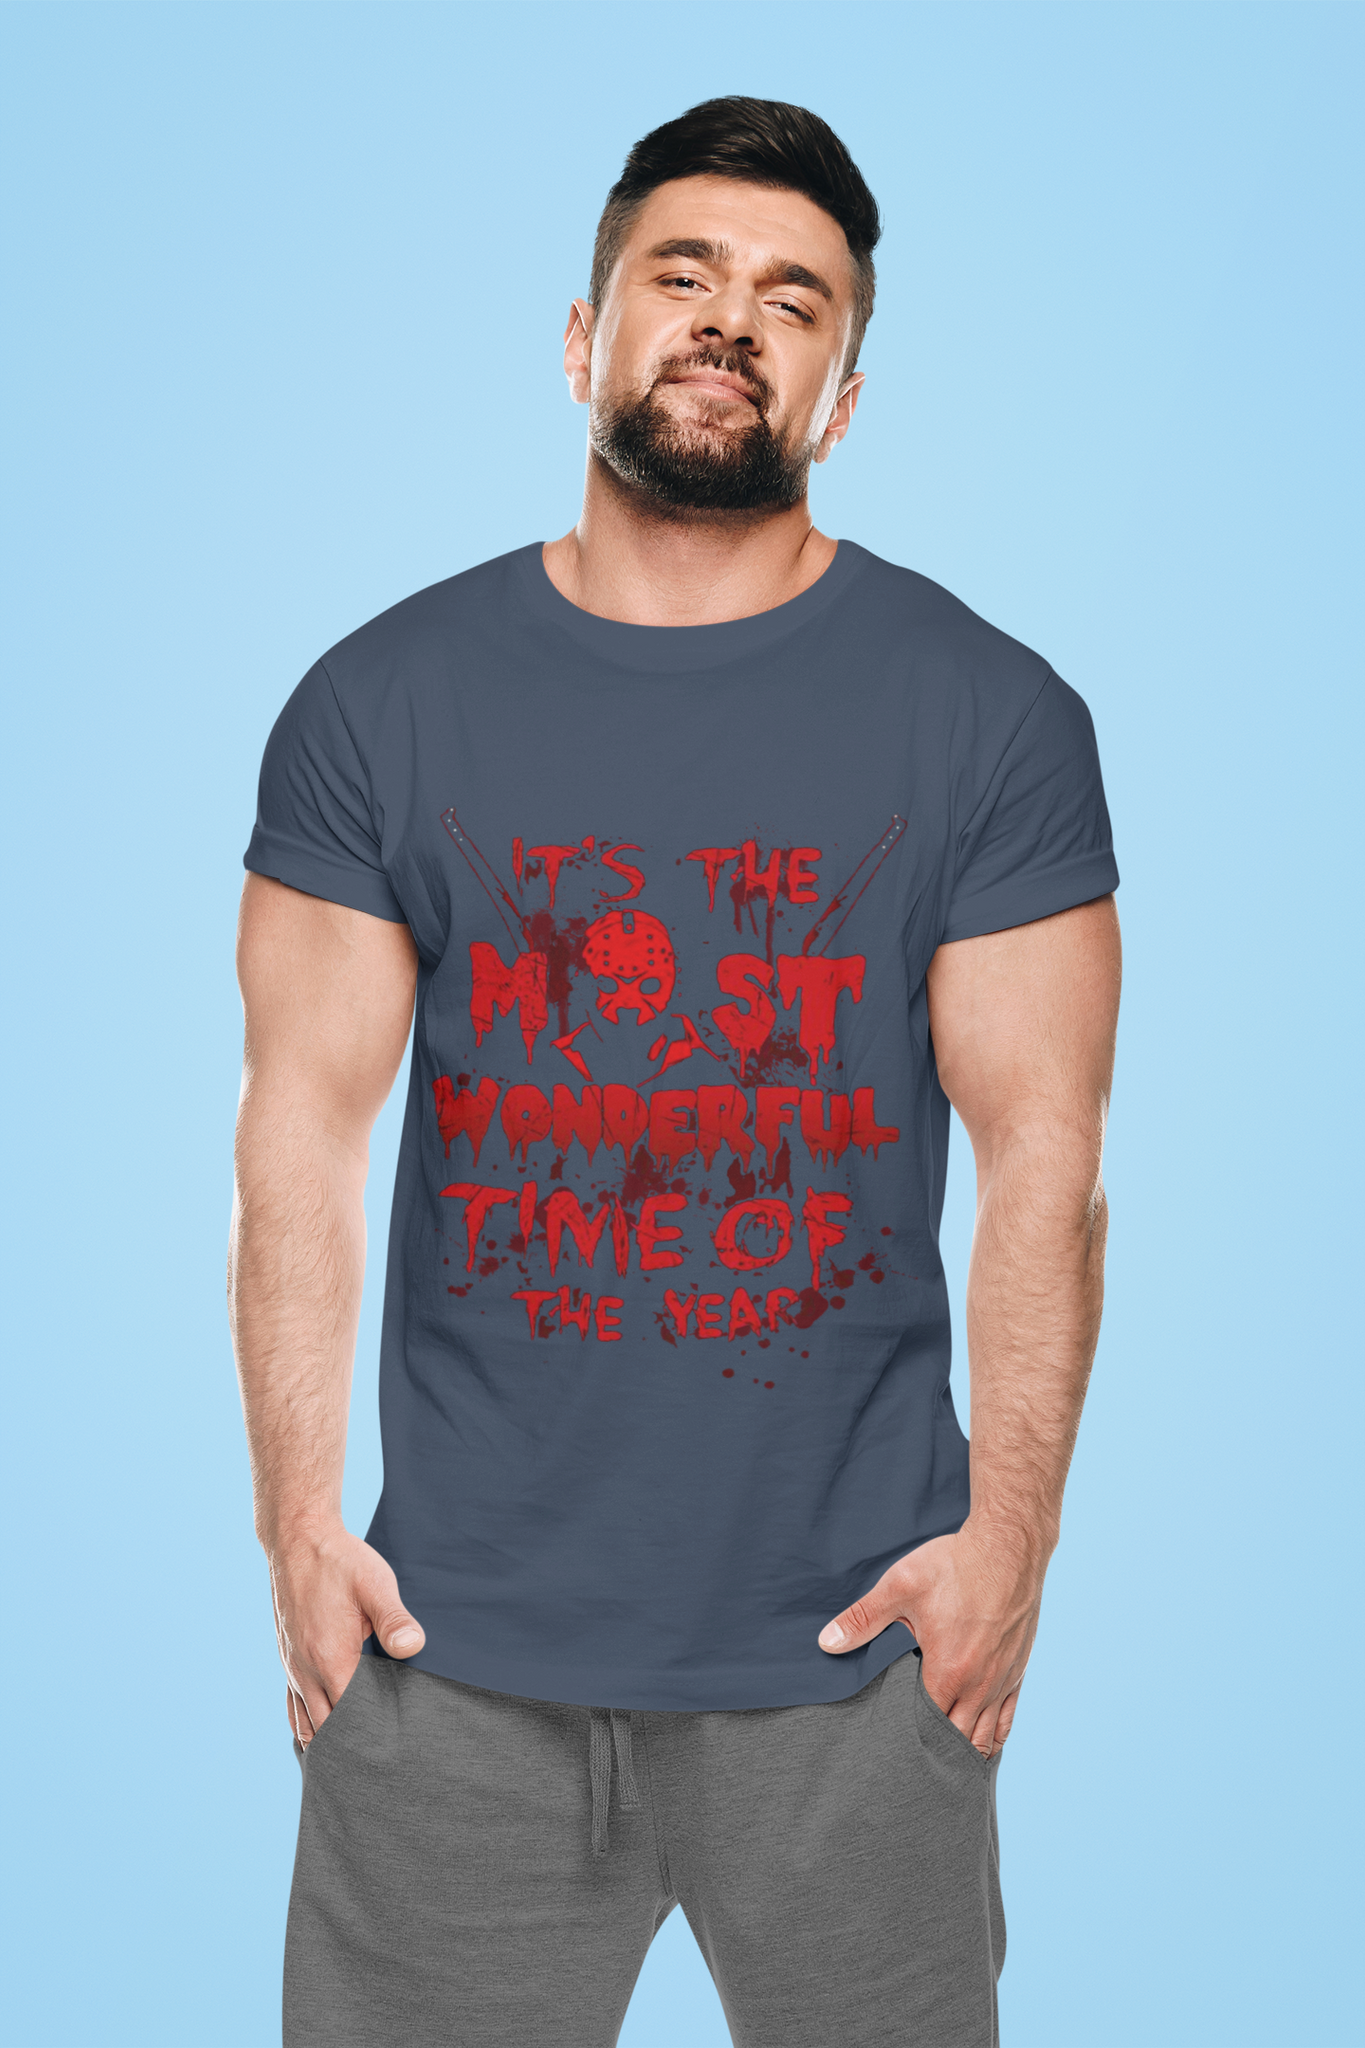 Friday 13th T Shirt, Its The Most Wonderful Time Of The Year T Shirt, Jason Voorhees Shirt, Halloween Gifts